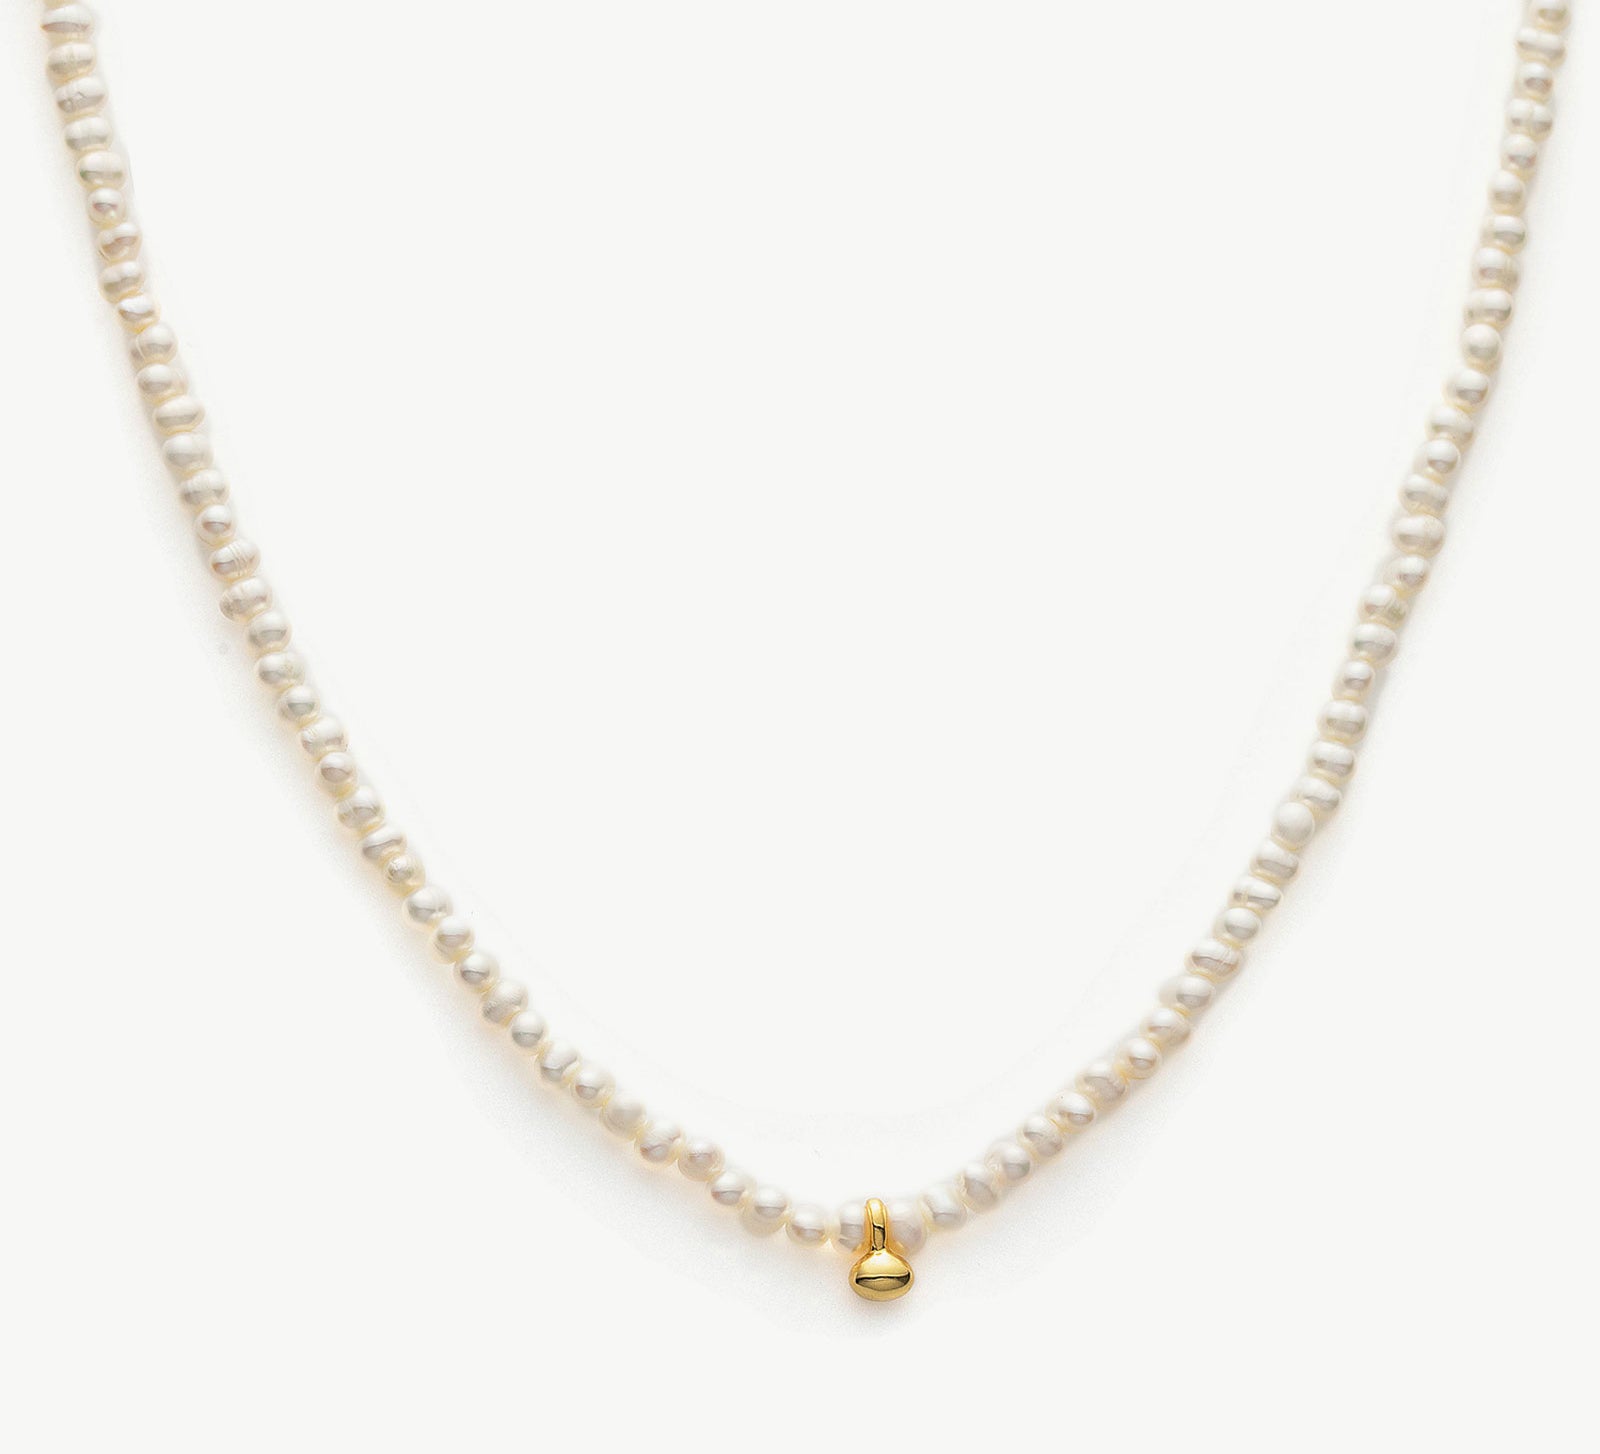 Pearl Gold Pendant Choker, a symbol of timeless elegance, this choker features a lustrous pearl pendant suspended from a delicate gold chain, creating a classic and sophisticated accessory for any occasion